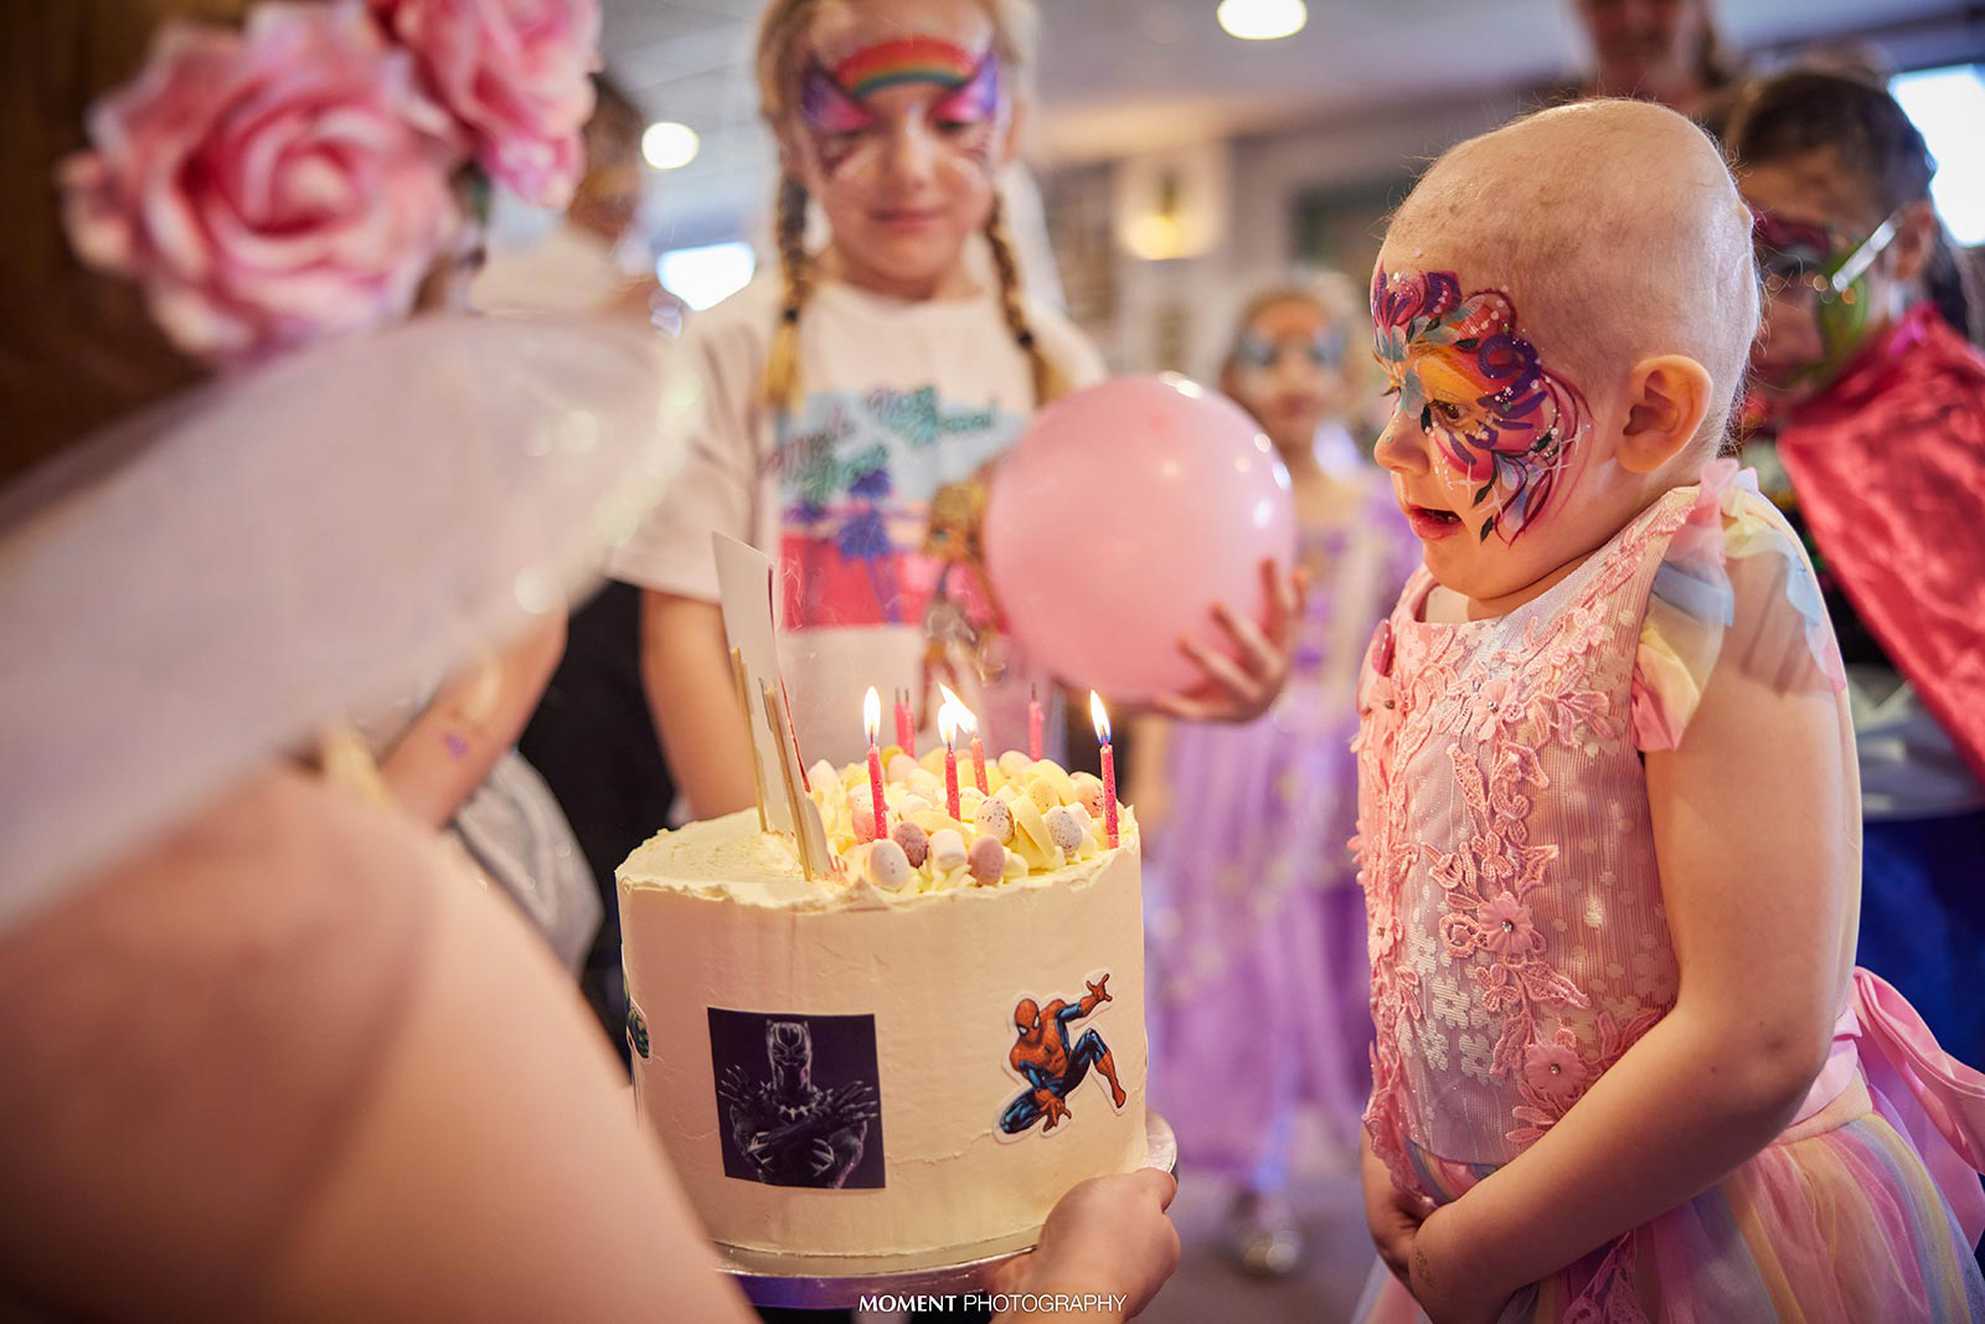 Ryleigh, with her face painted, blowing out the candles on her birthday cake.